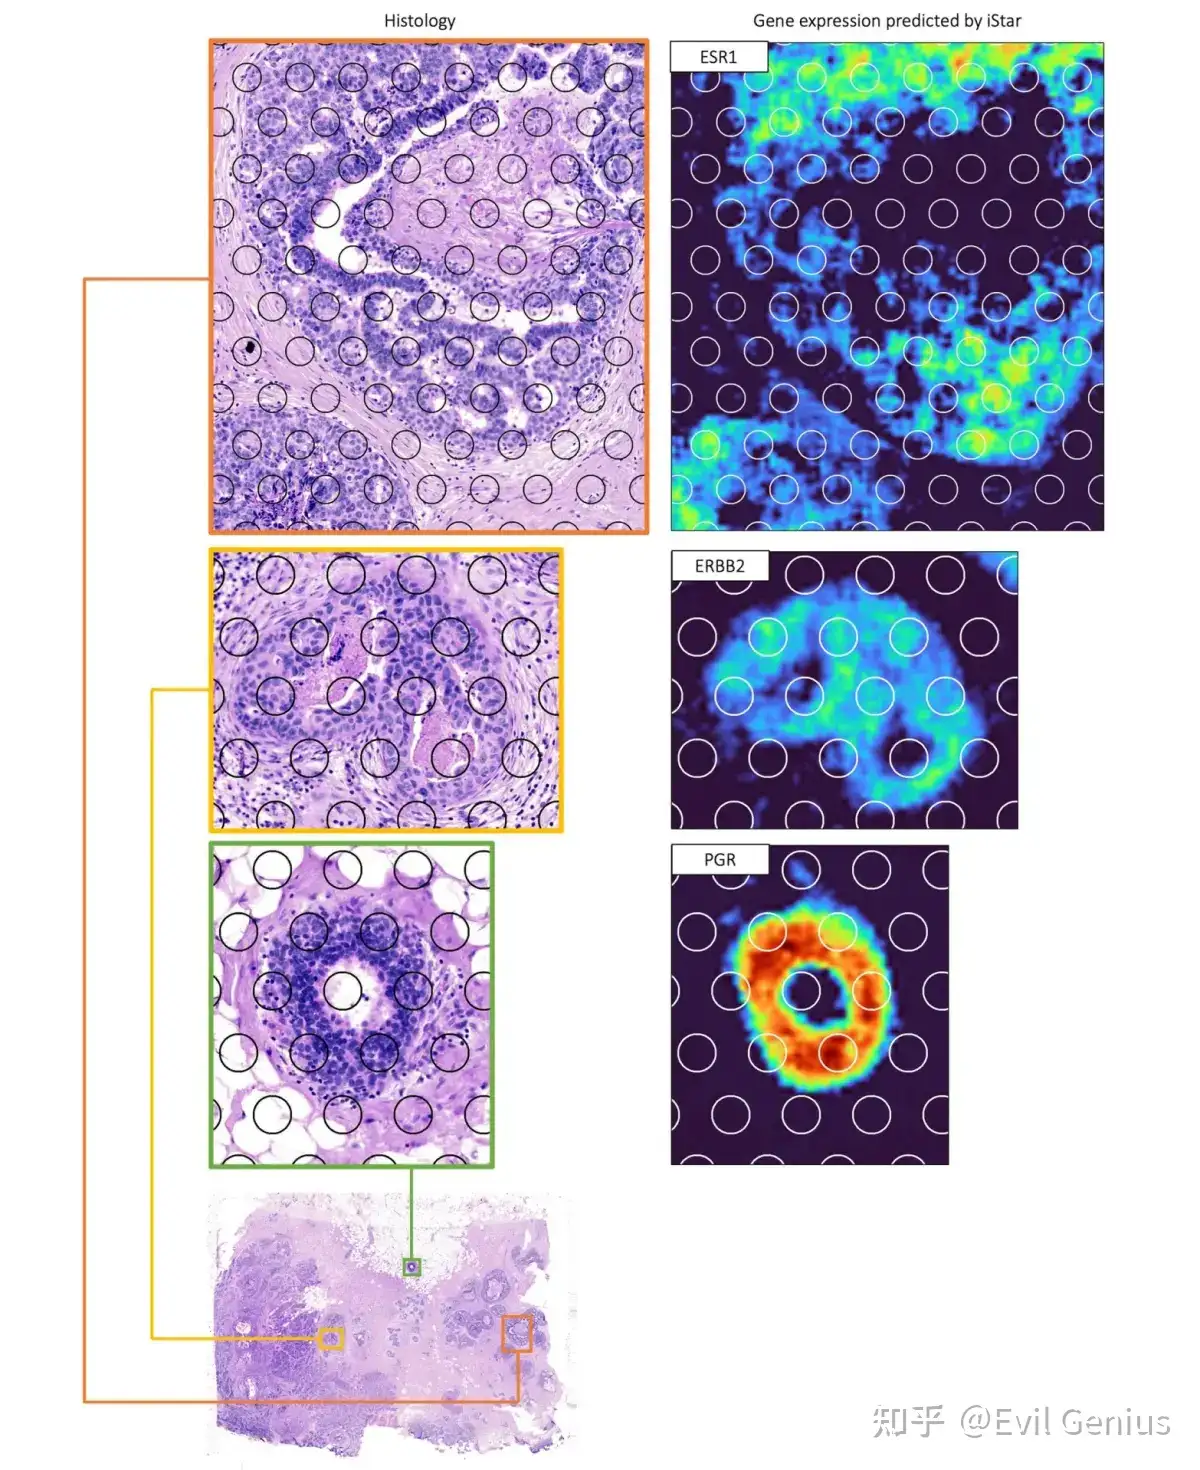 Correlation between super-resolution gene expression and histology